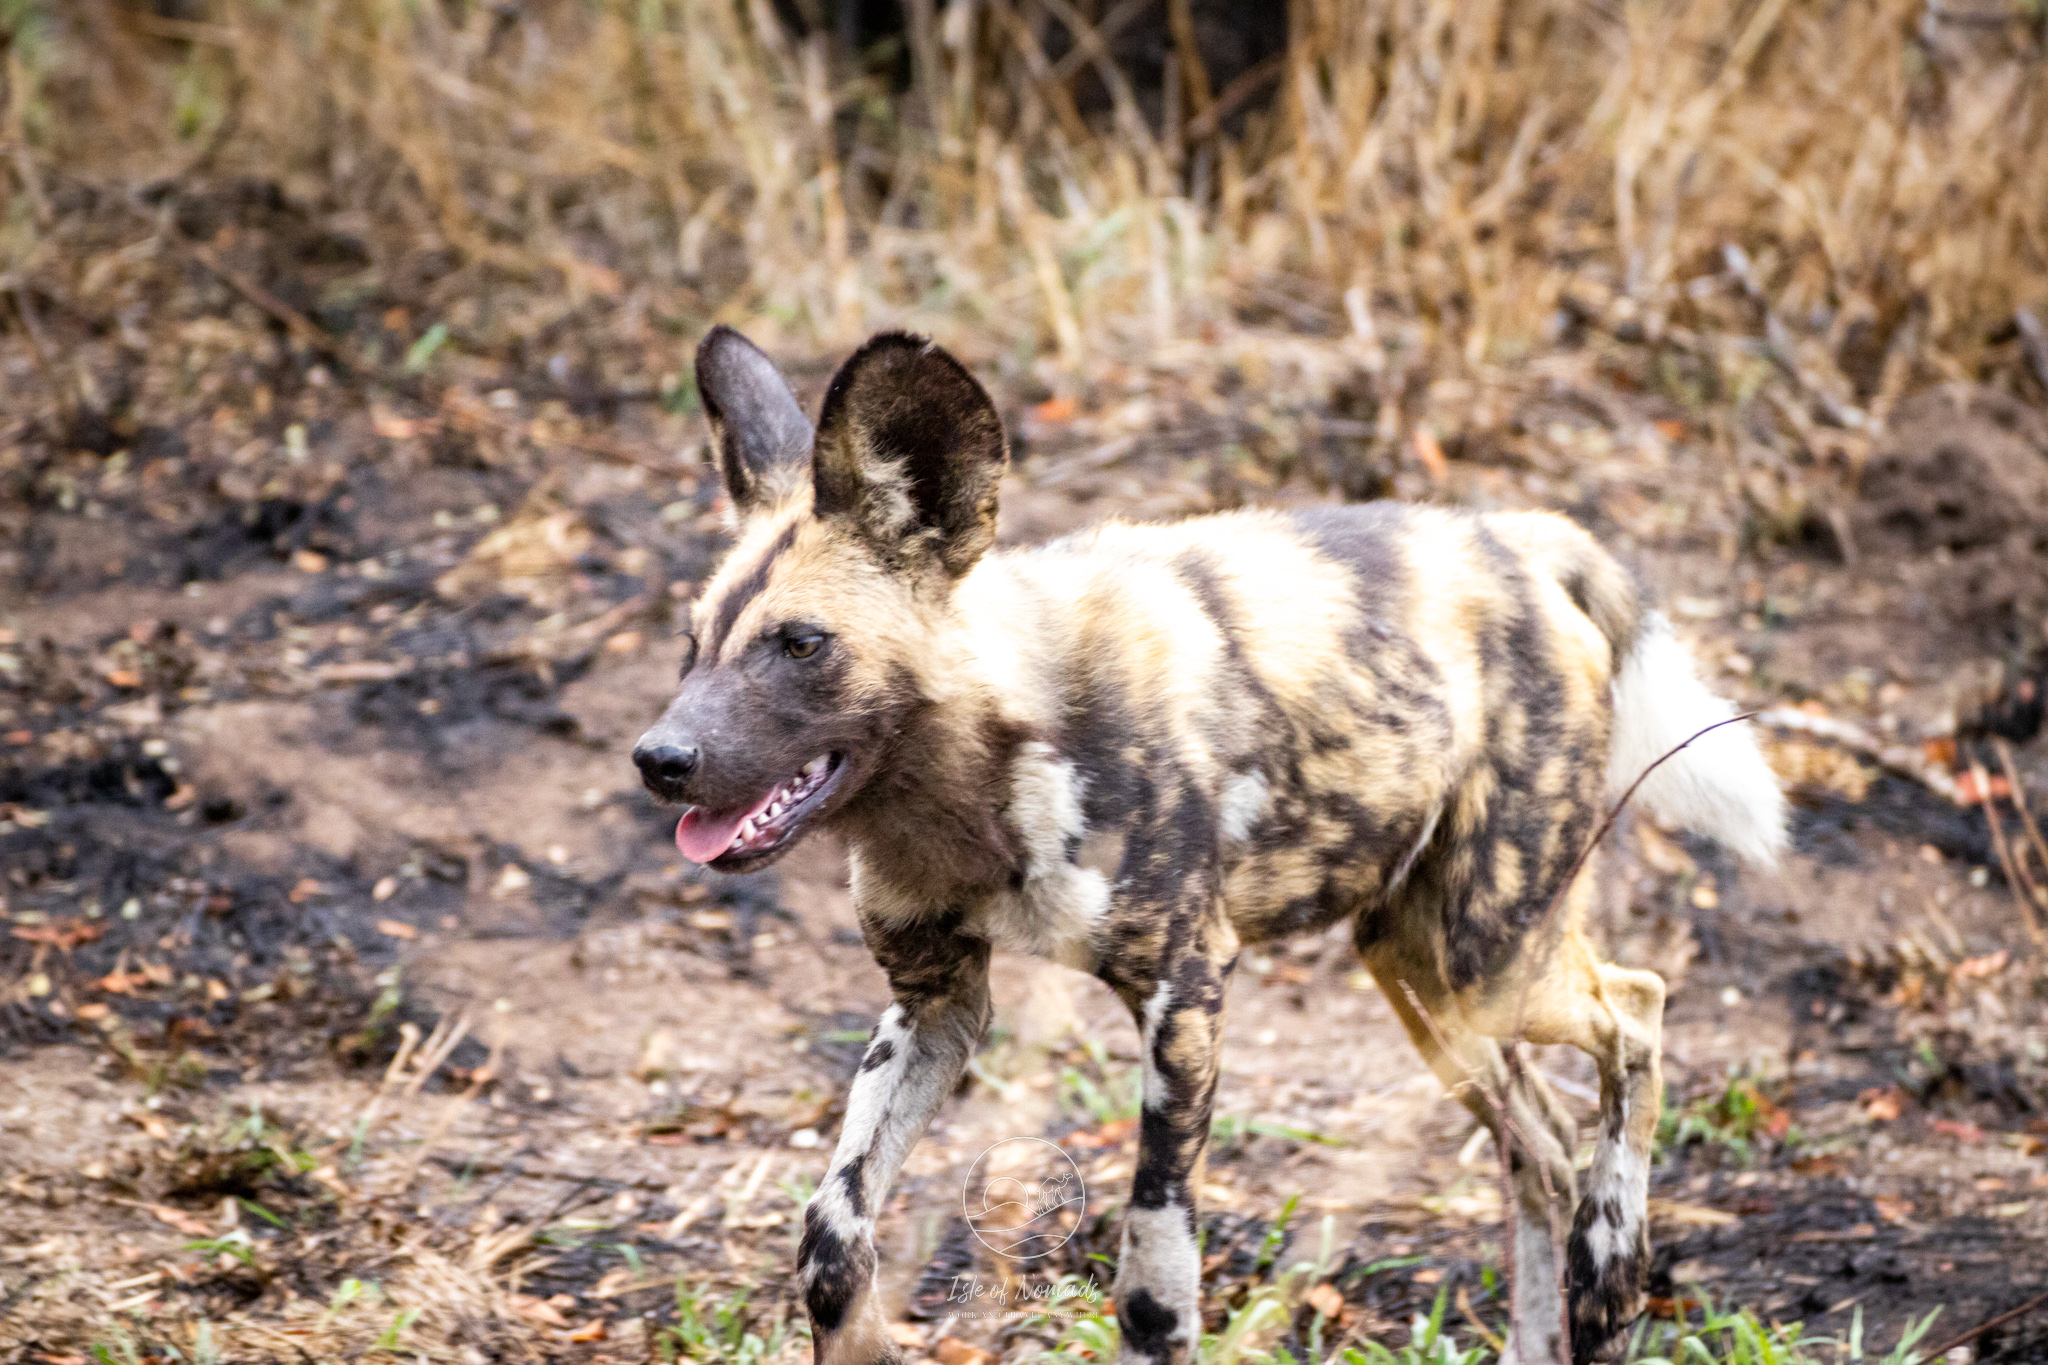 We only found out after our day driving in Kruger that we apparently were very lucky to spot African Wild Dogs